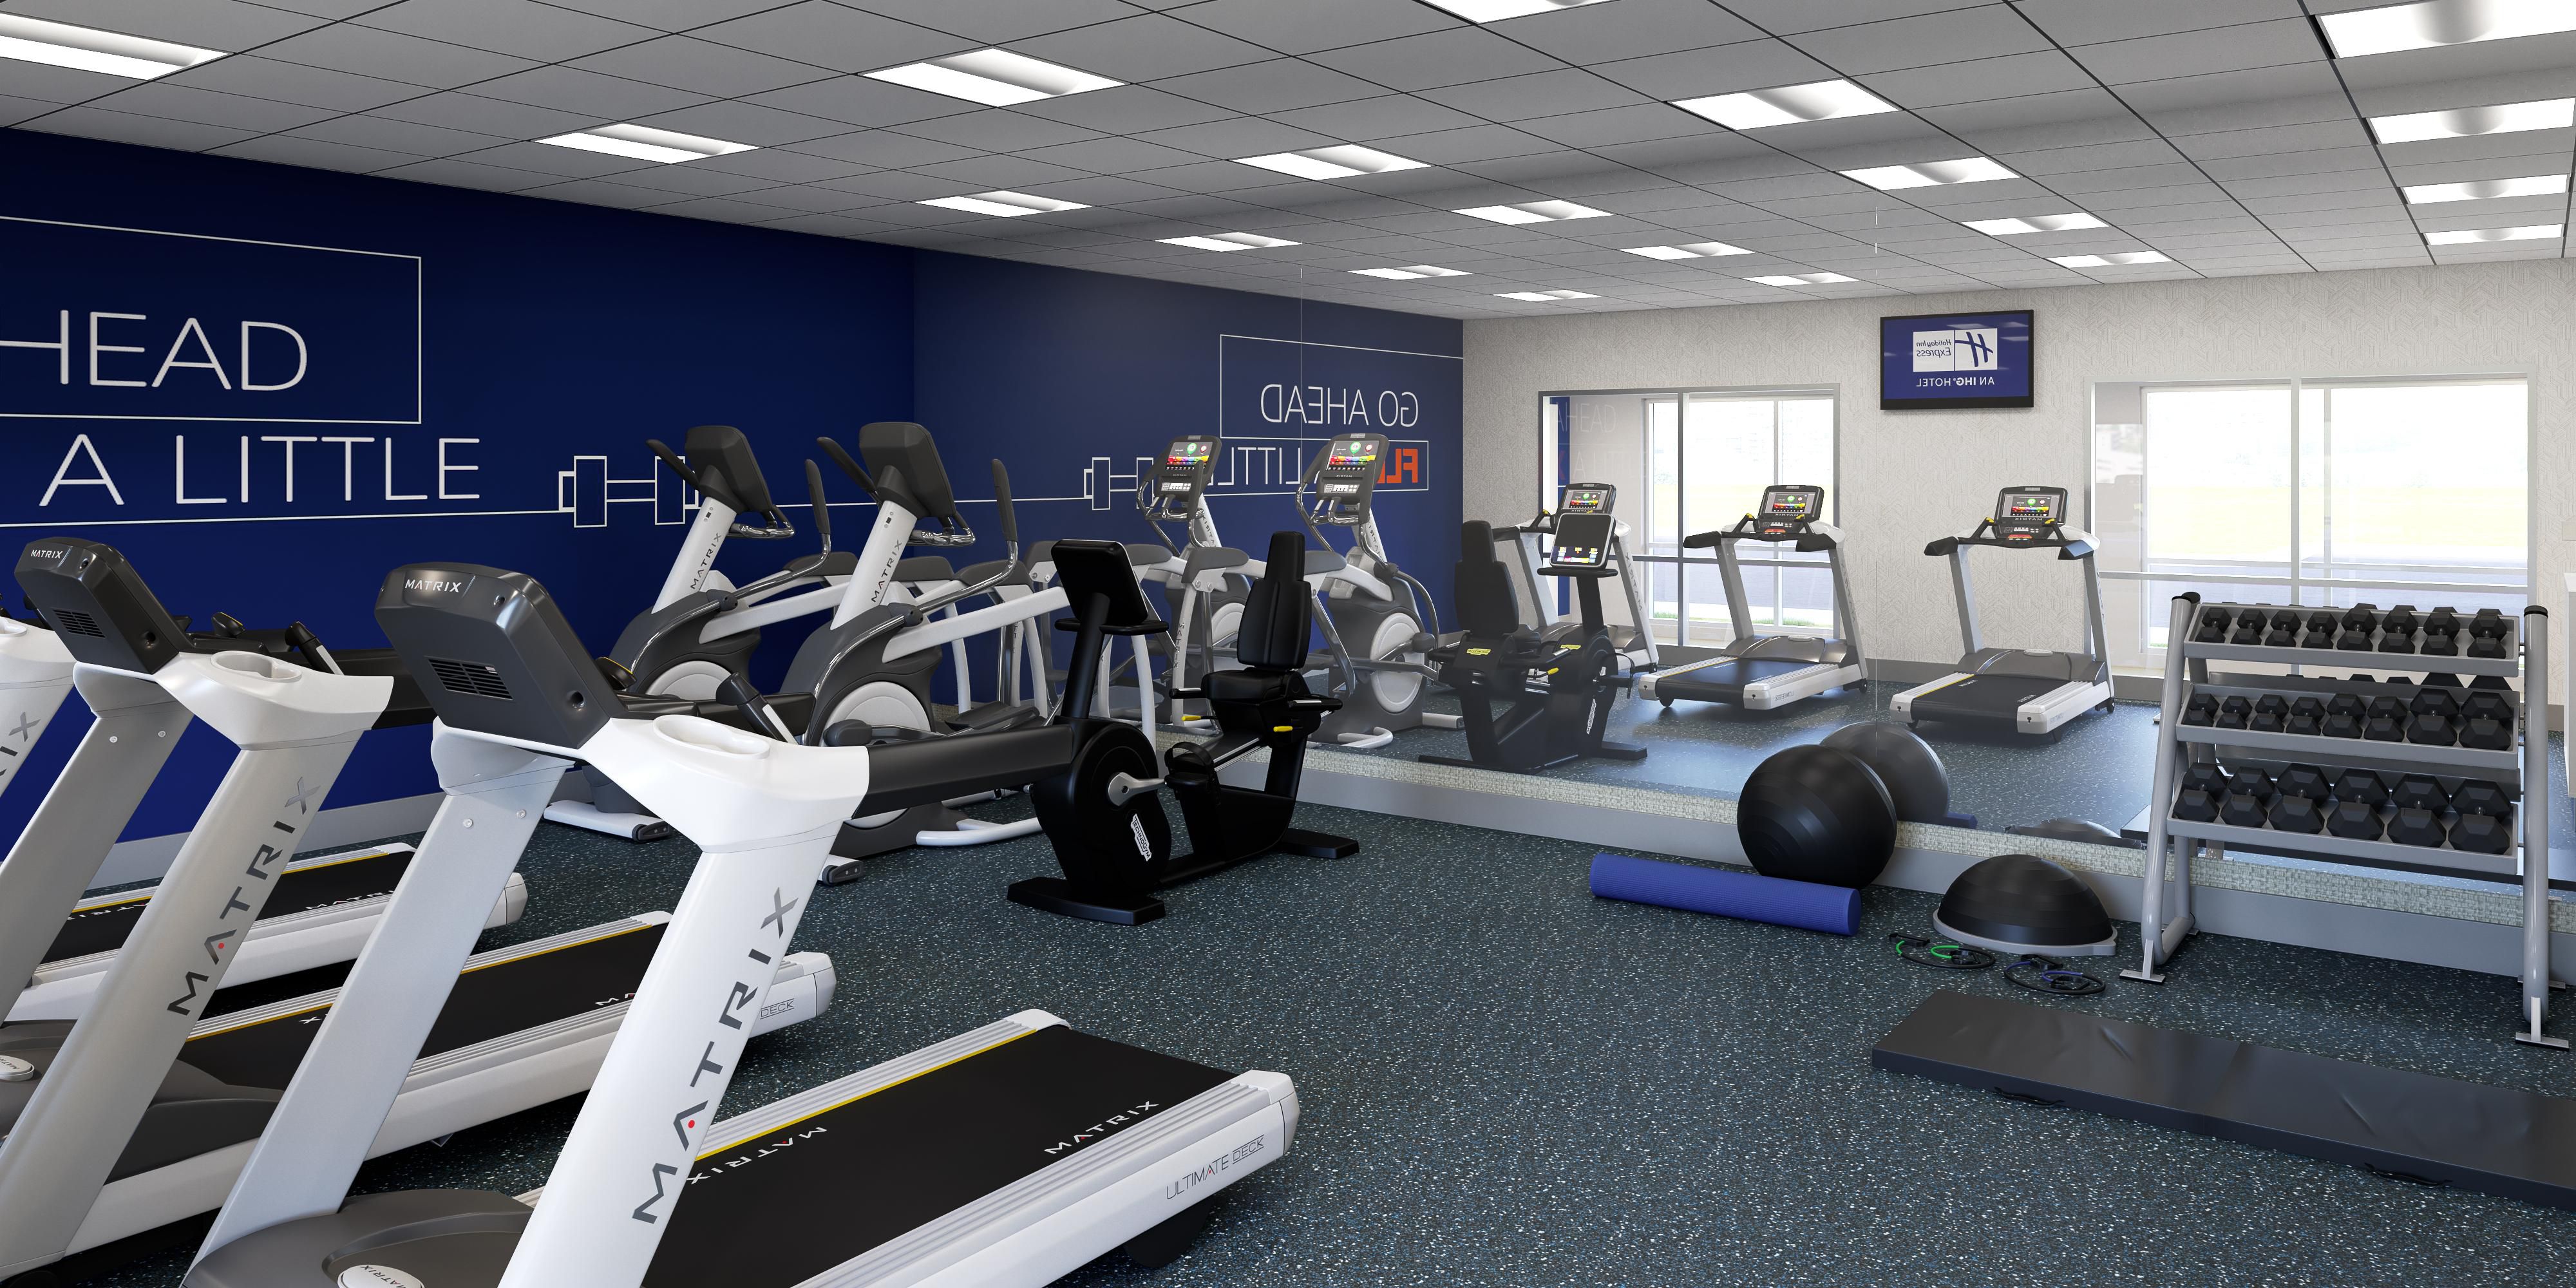 Traveling doesn’t mean you can’t stick with your fitness goals. Stay on target and relieve some stress in our 24-hour Fitness Center. 